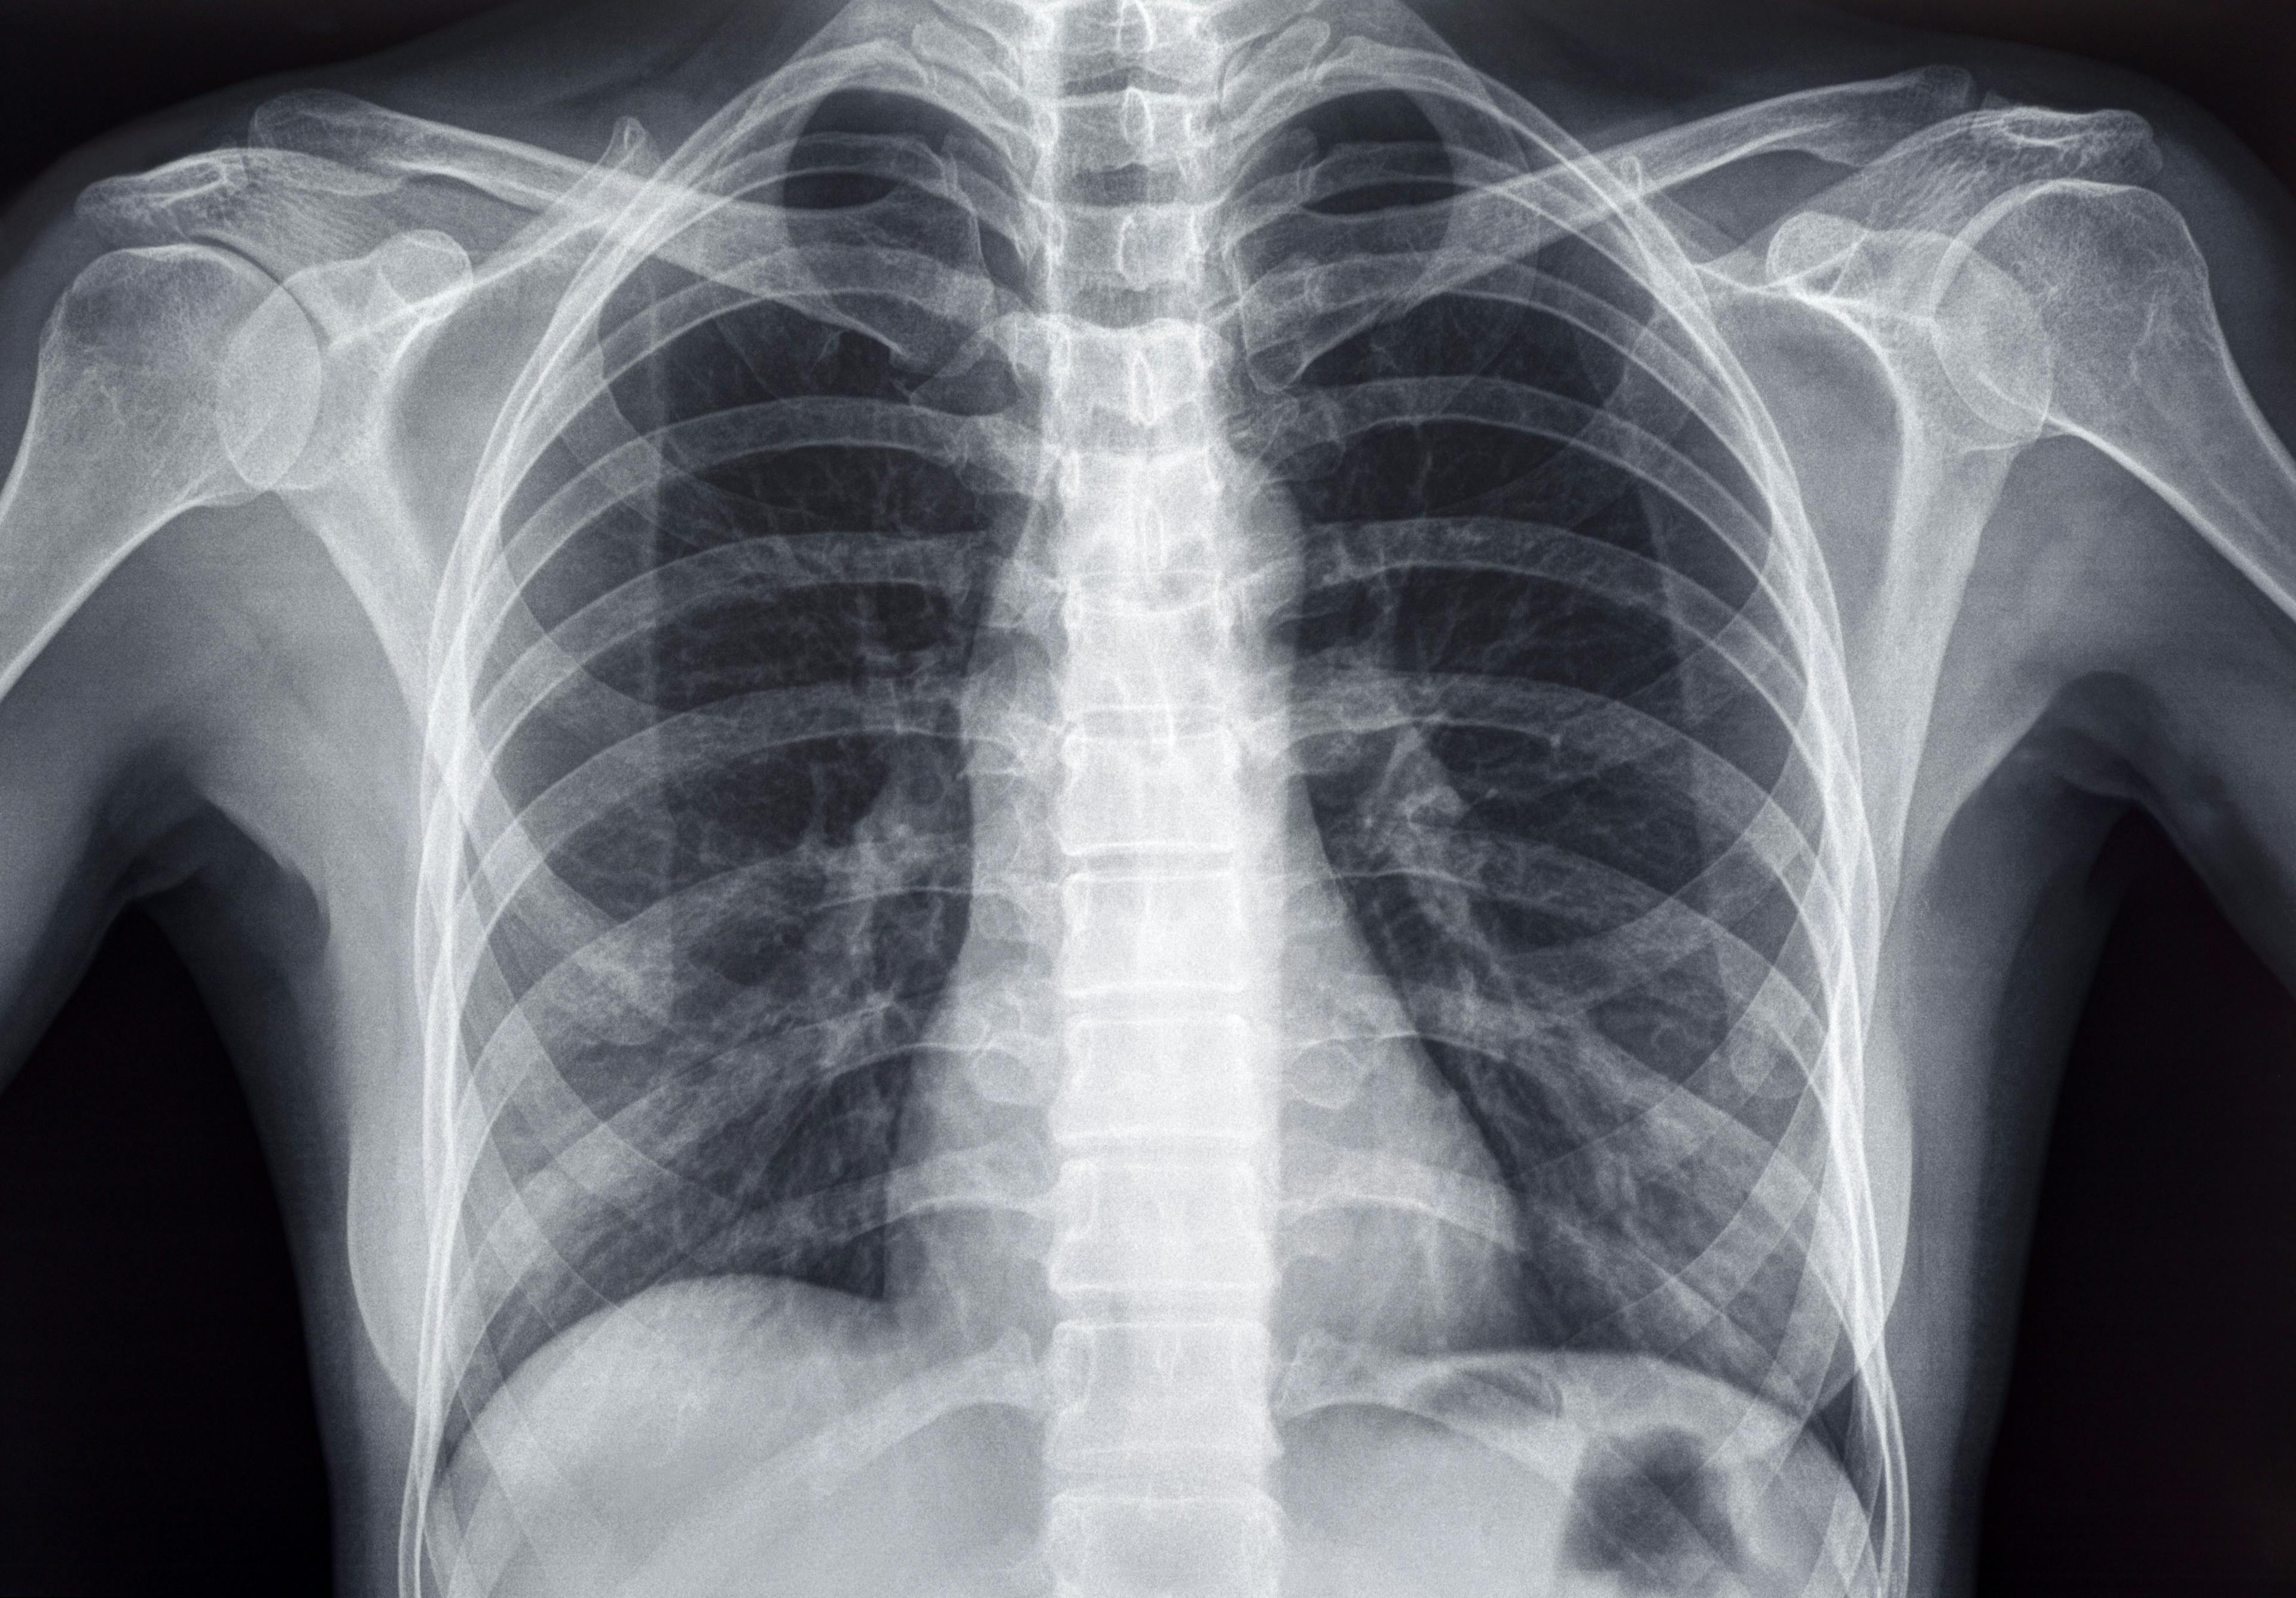 AI Trained on a Diverse Dataset Perform Better Chest X-ray Analysis